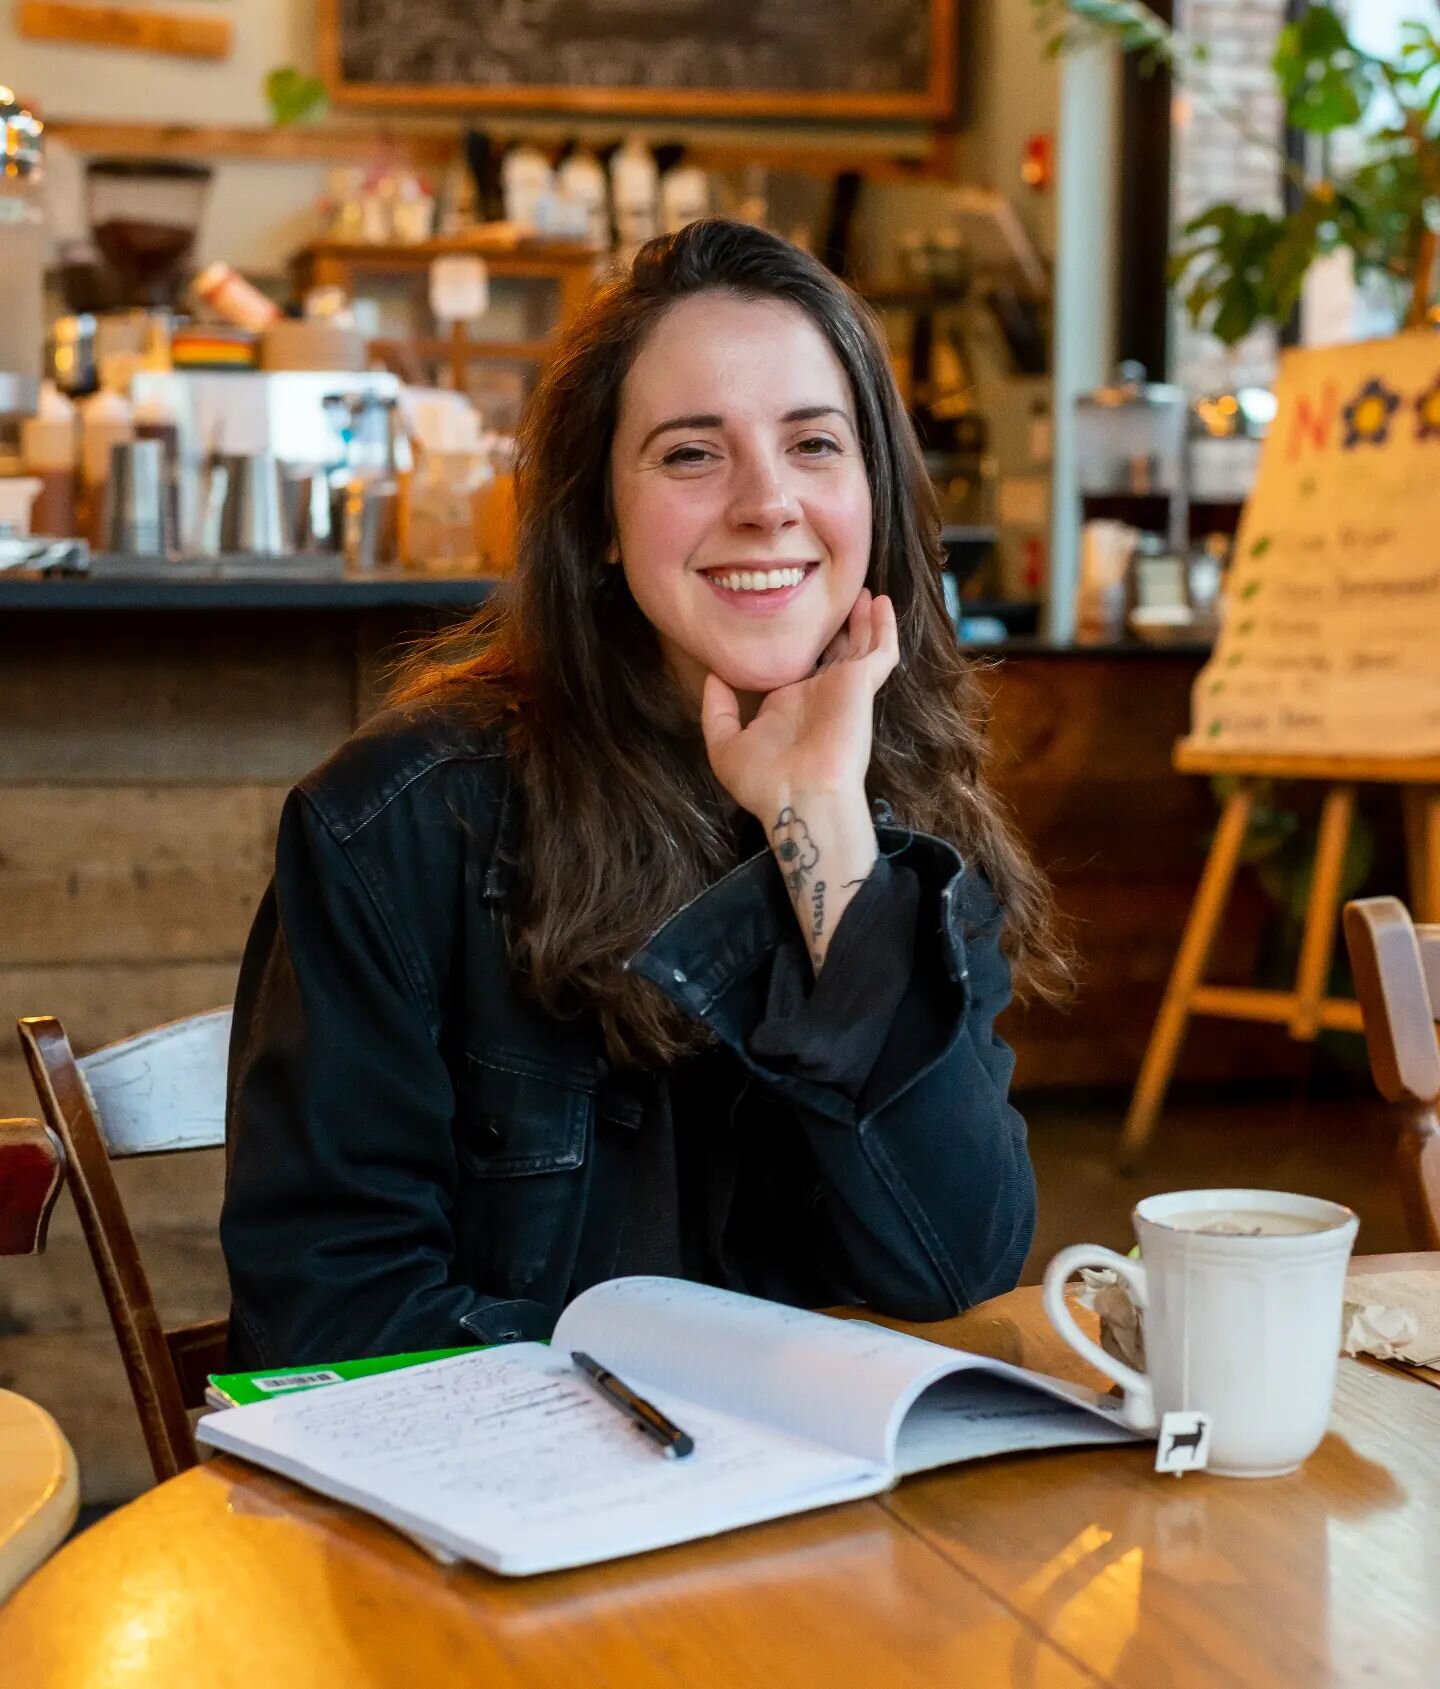 Meet our neighbors!

Say hi to Clare! Neighbor, customer, and friend to all of us at Nook. Clare often gets an earl grey tea with milk and honey 🍯 

After working their shift at Other People's Clothes next door, Clare likes unwinding at nook, sippin